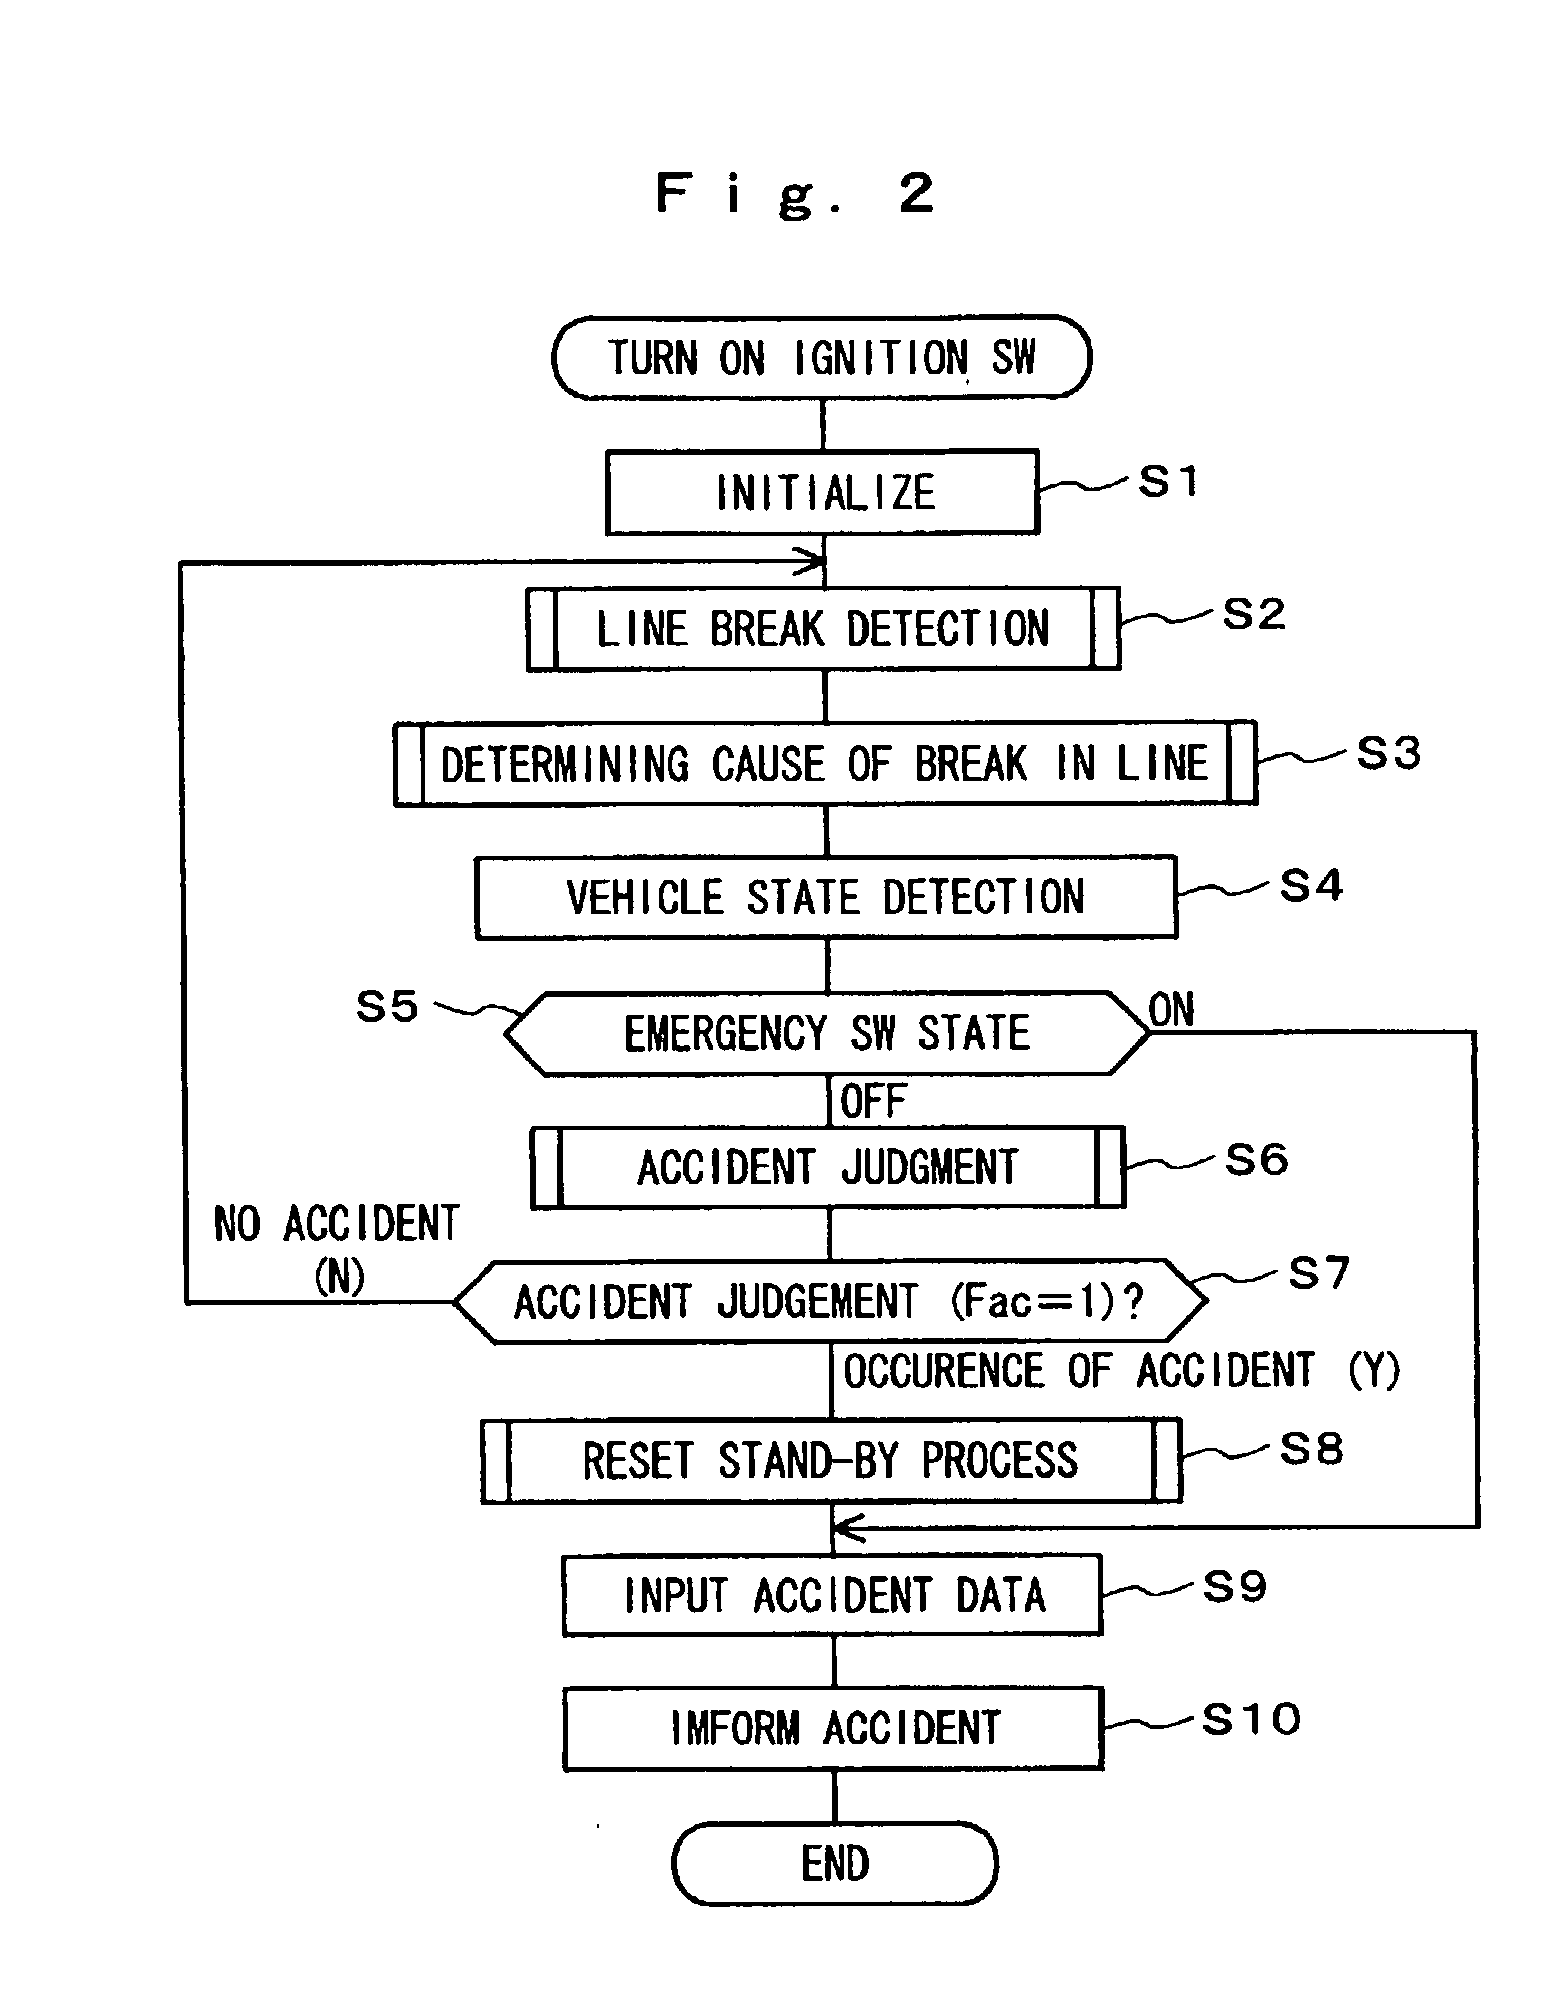 Automatic accident informing apparatus for two-wheel vehicle